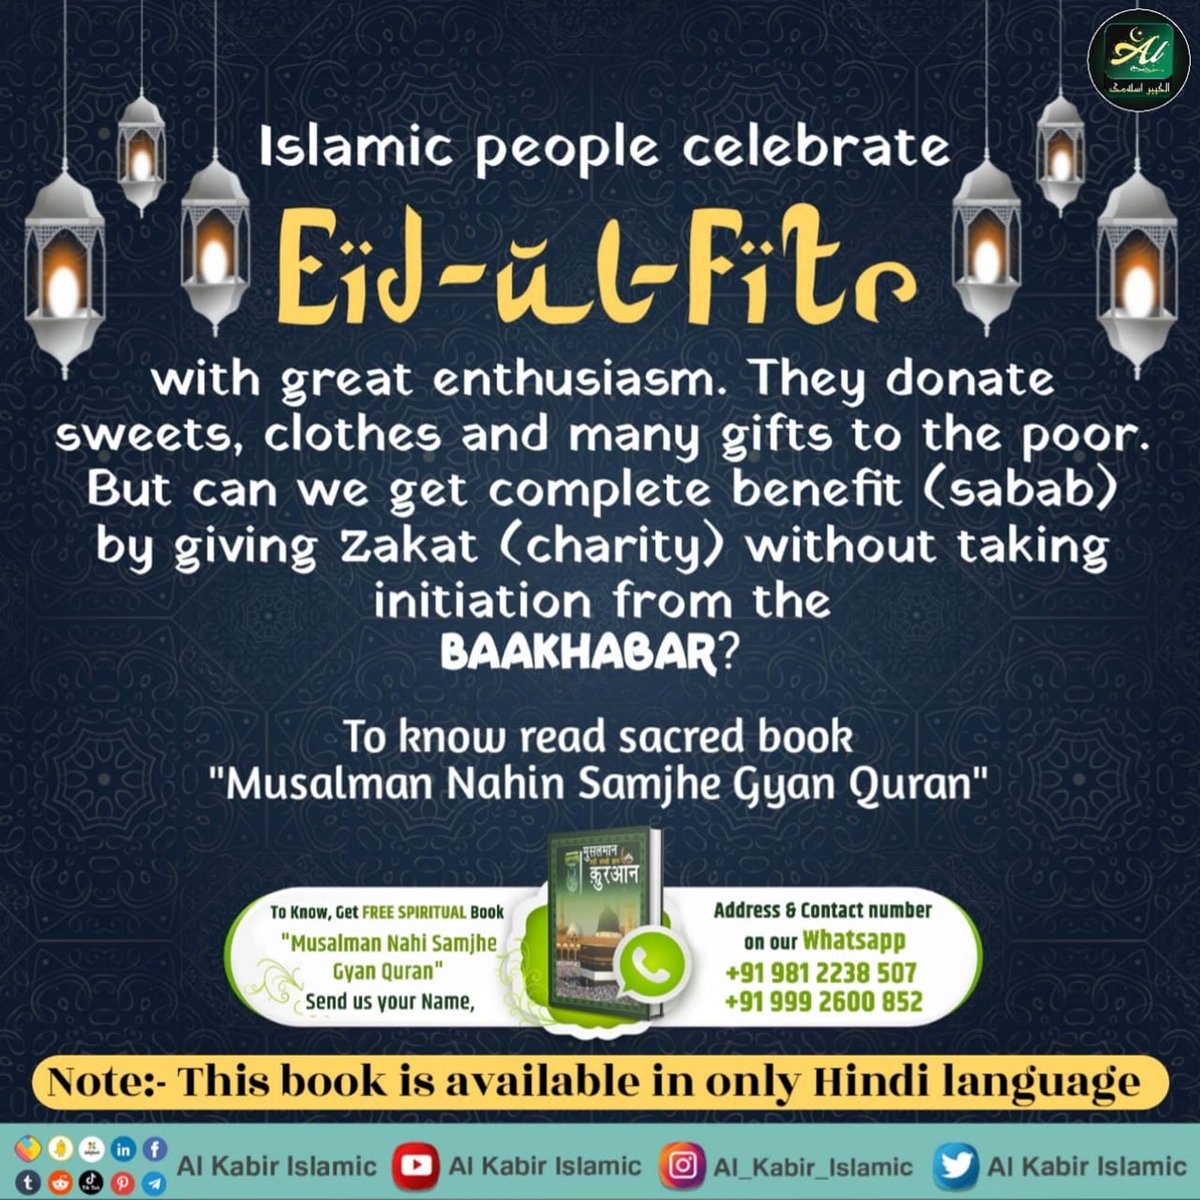 #अल्लाह_का_इल्म_बाखबर_से_पूछो 🌃Islamic people celebrate Eid-ul-fitr with great enthusiasm. They donate sweets, clothes and many gifts to the poor. But can we get complete benefit(sabab) by giving zakat (charity) without taking initiation from the Baakhabar ? Santrampal mahraj ji